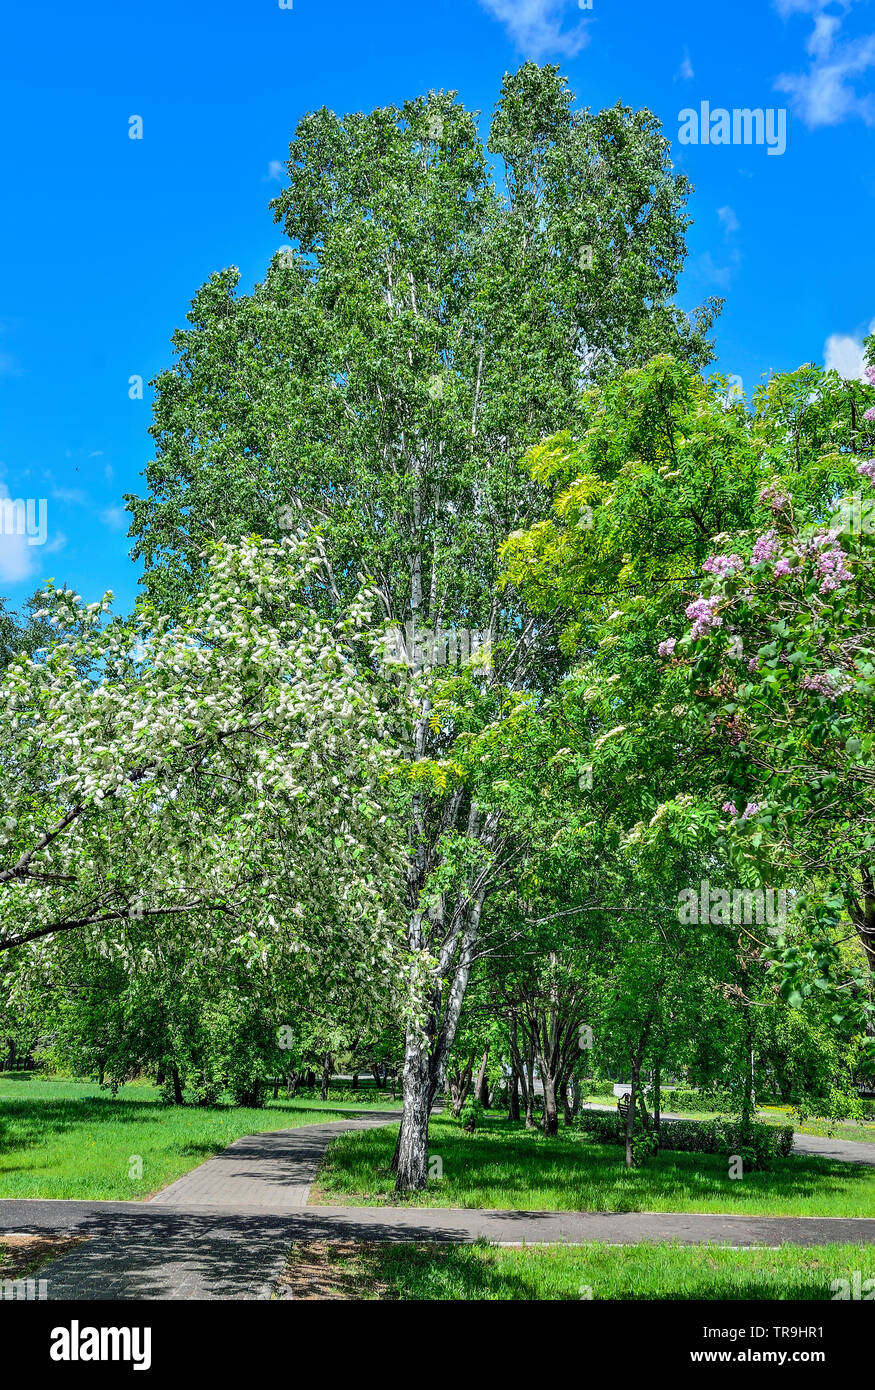 Sunny spring day in the park with the bird cherry trees, lilac and rowan in full bloom. Play of light and shadows on walkway under blossoming trees. S Stock Photo